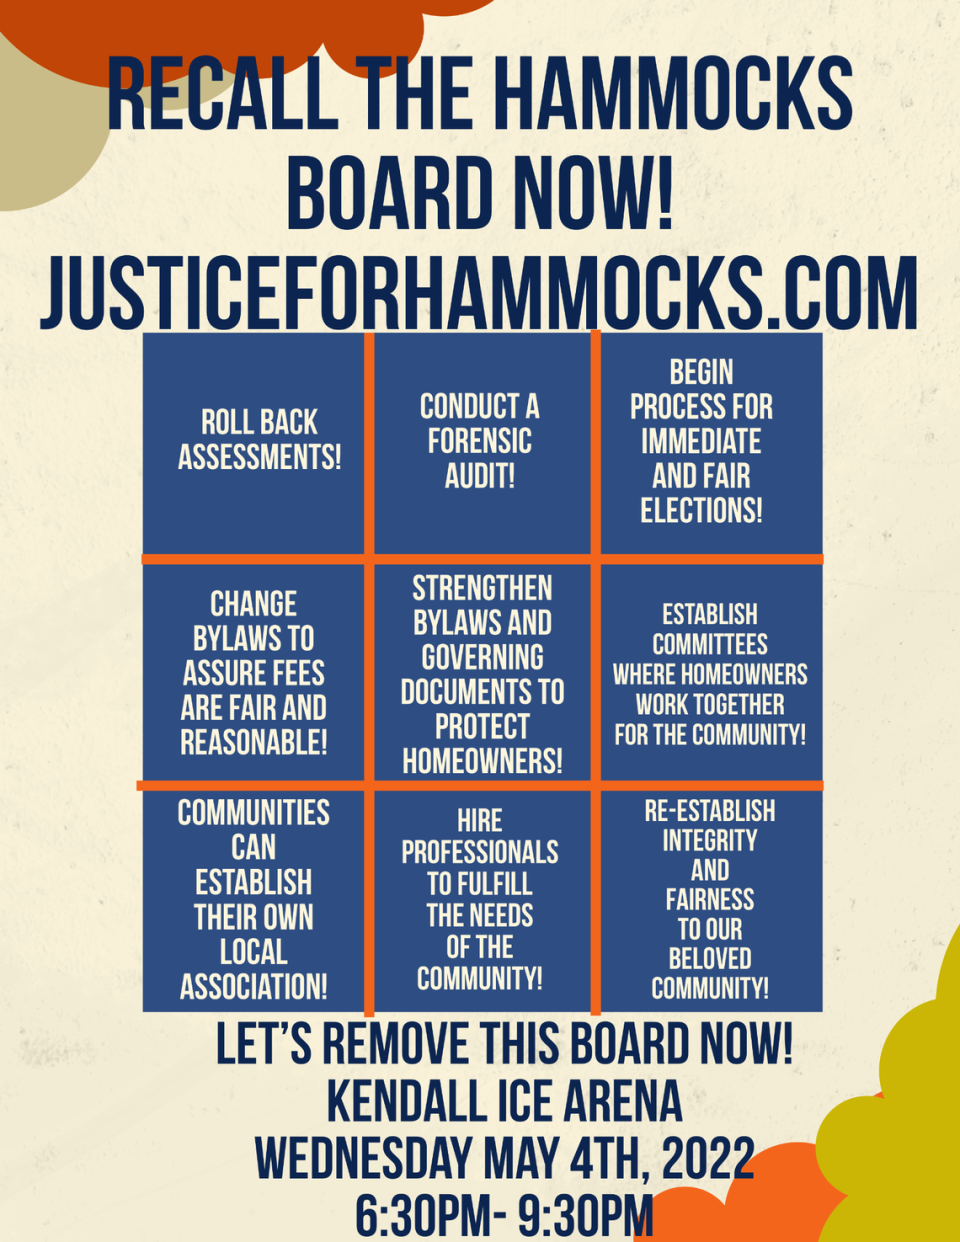 A flyer announcing a Justice for the Hammocks rally at the Kendall Ice Arena to recall the HOA’s board of directors.